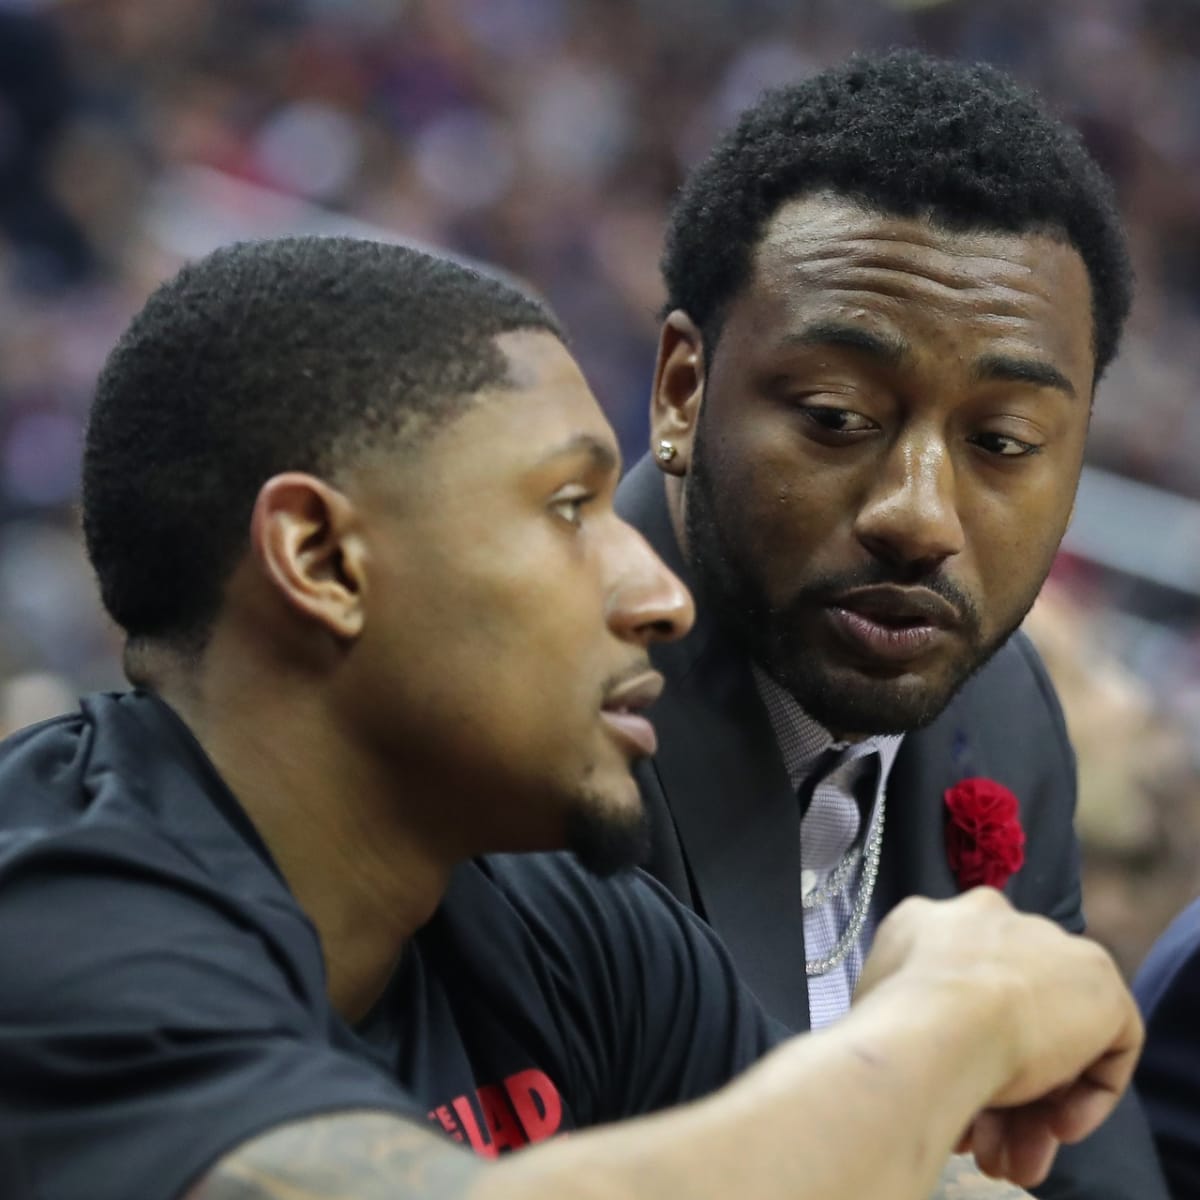 Harrington wants Wall and Beal to love each other